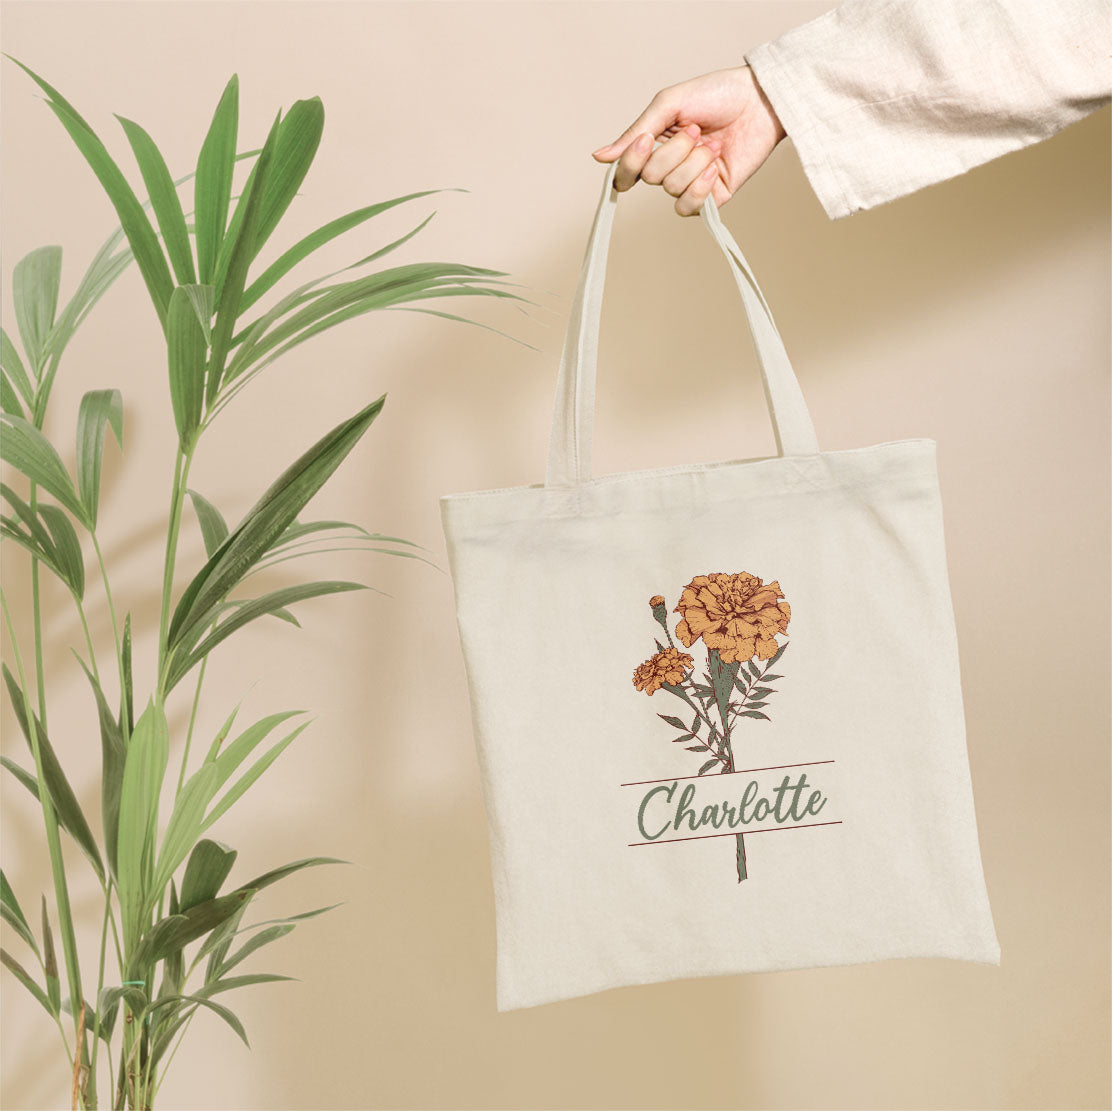 Birth Month Flower - Personalized Tote Bag